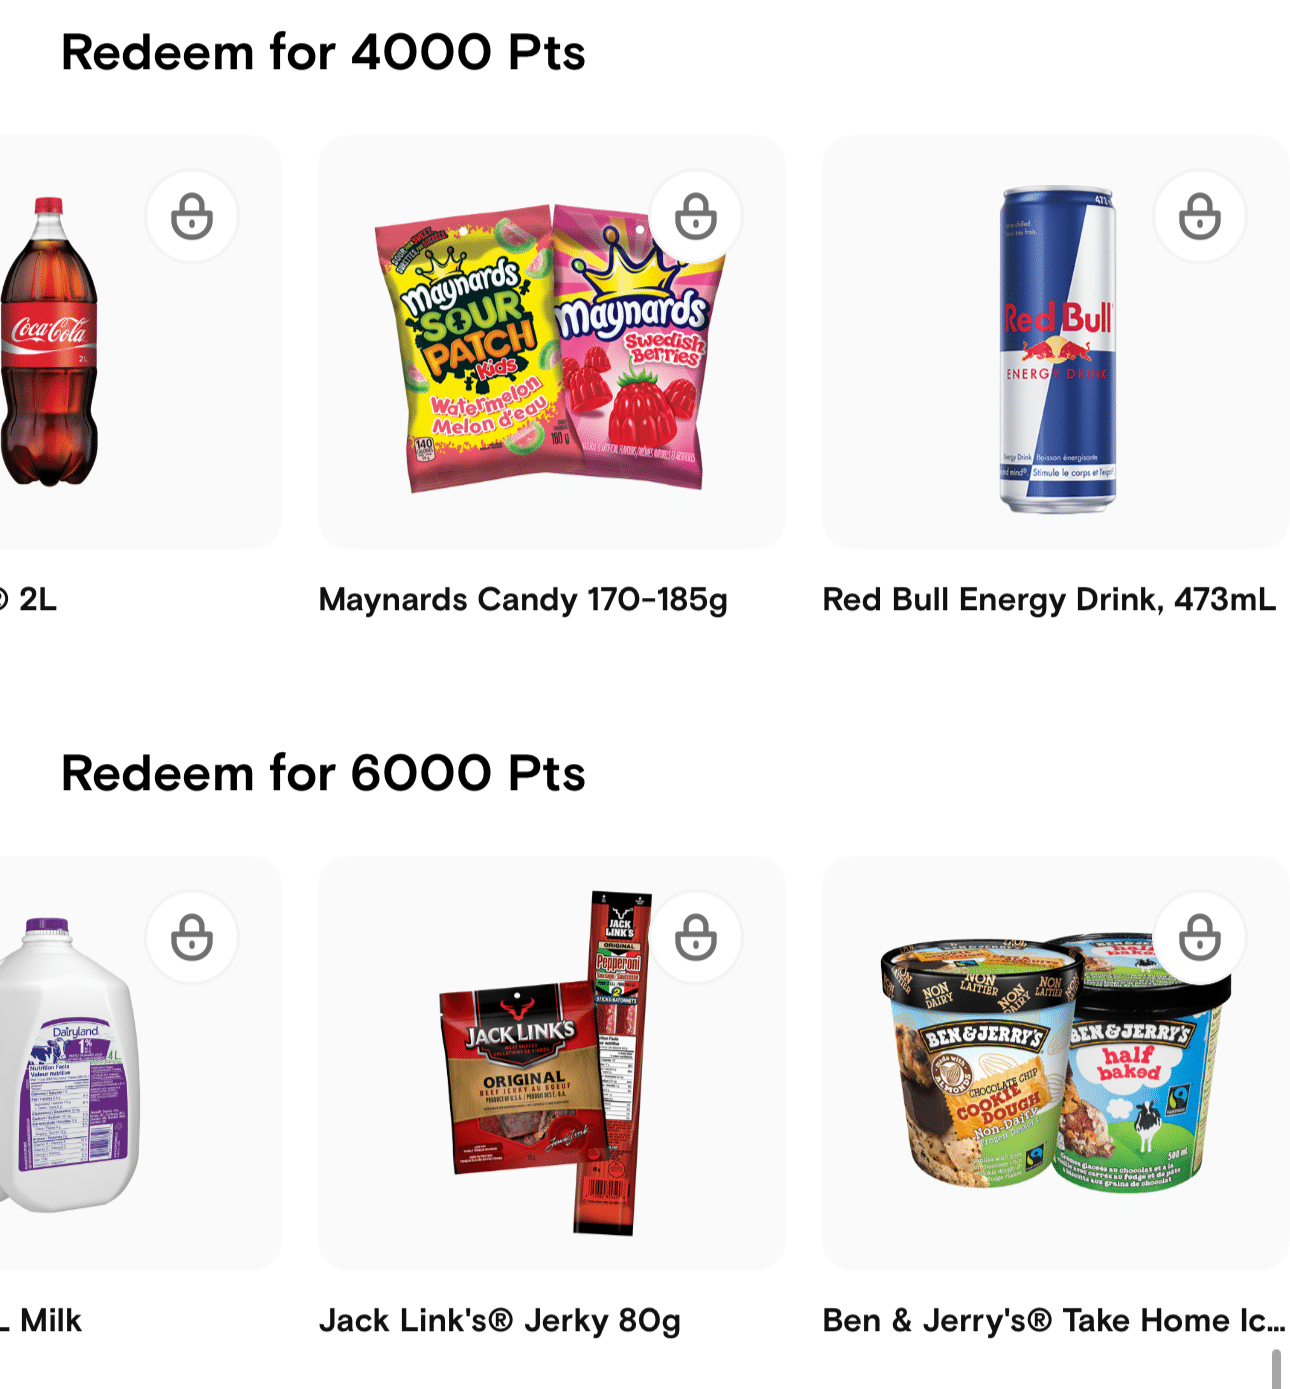 redeem 7rewards points for snack products